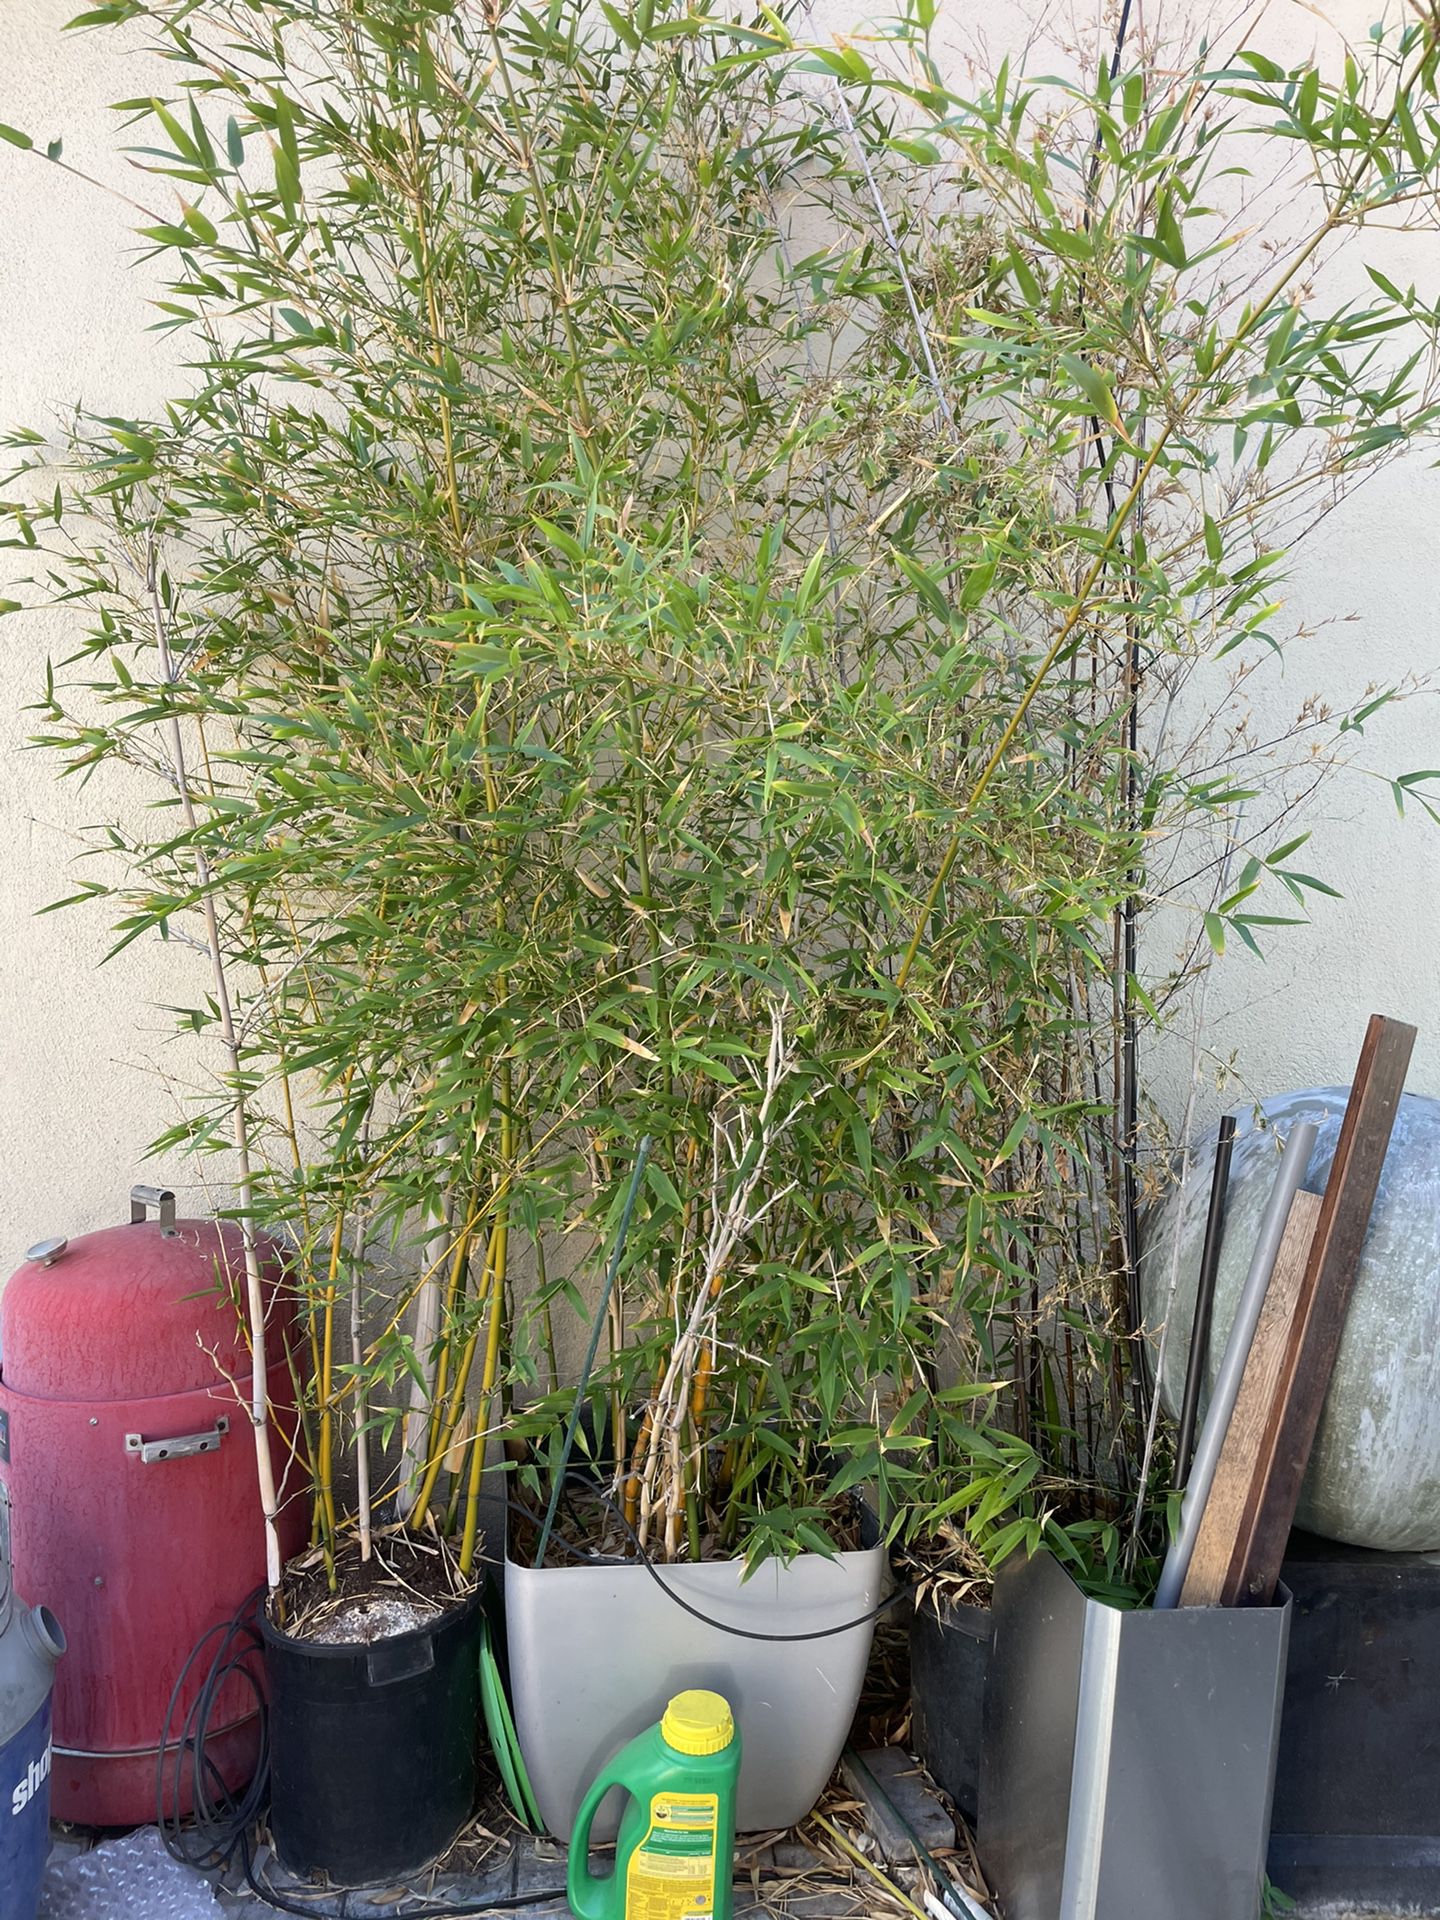 Bamboo Potted Plant 3 To Choose From 